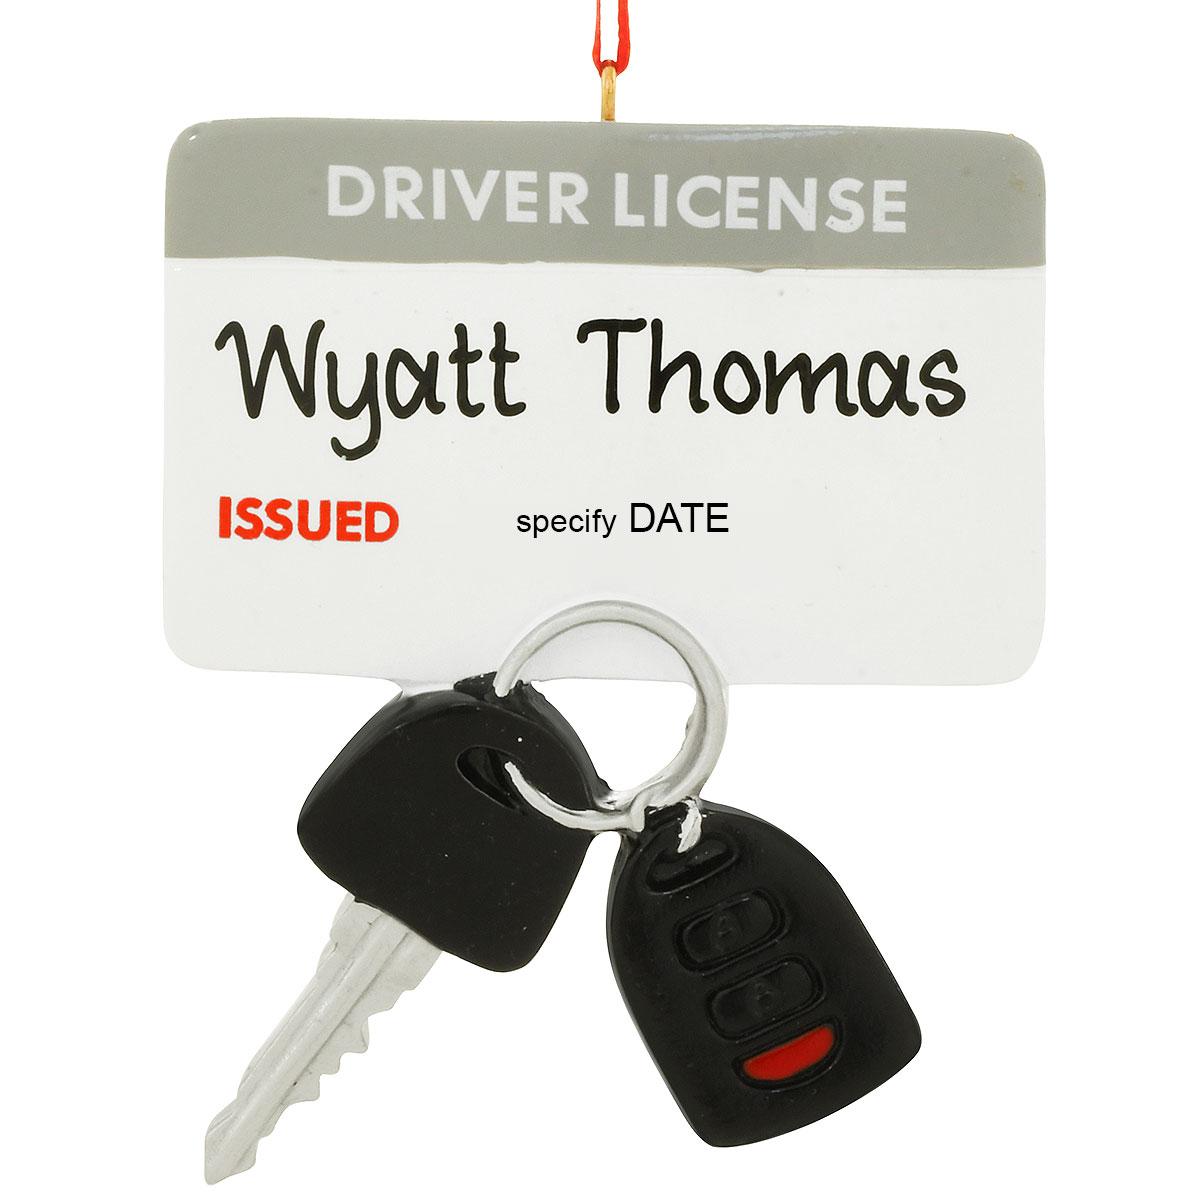 Driver's License With Key And Fob